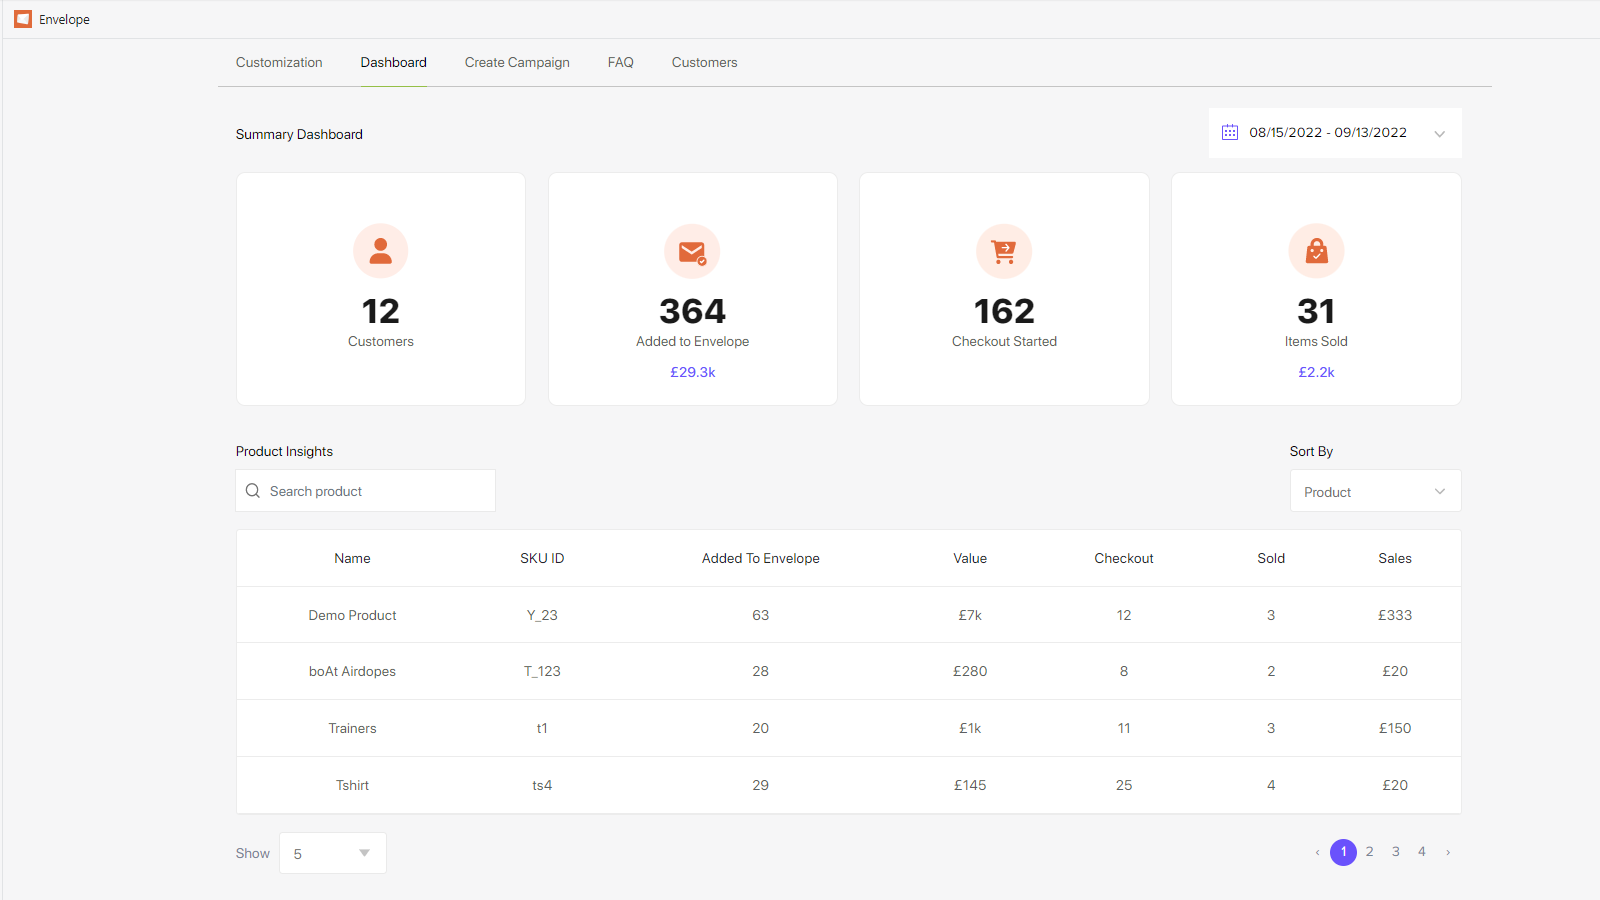 Dashboard summery and Product Insight